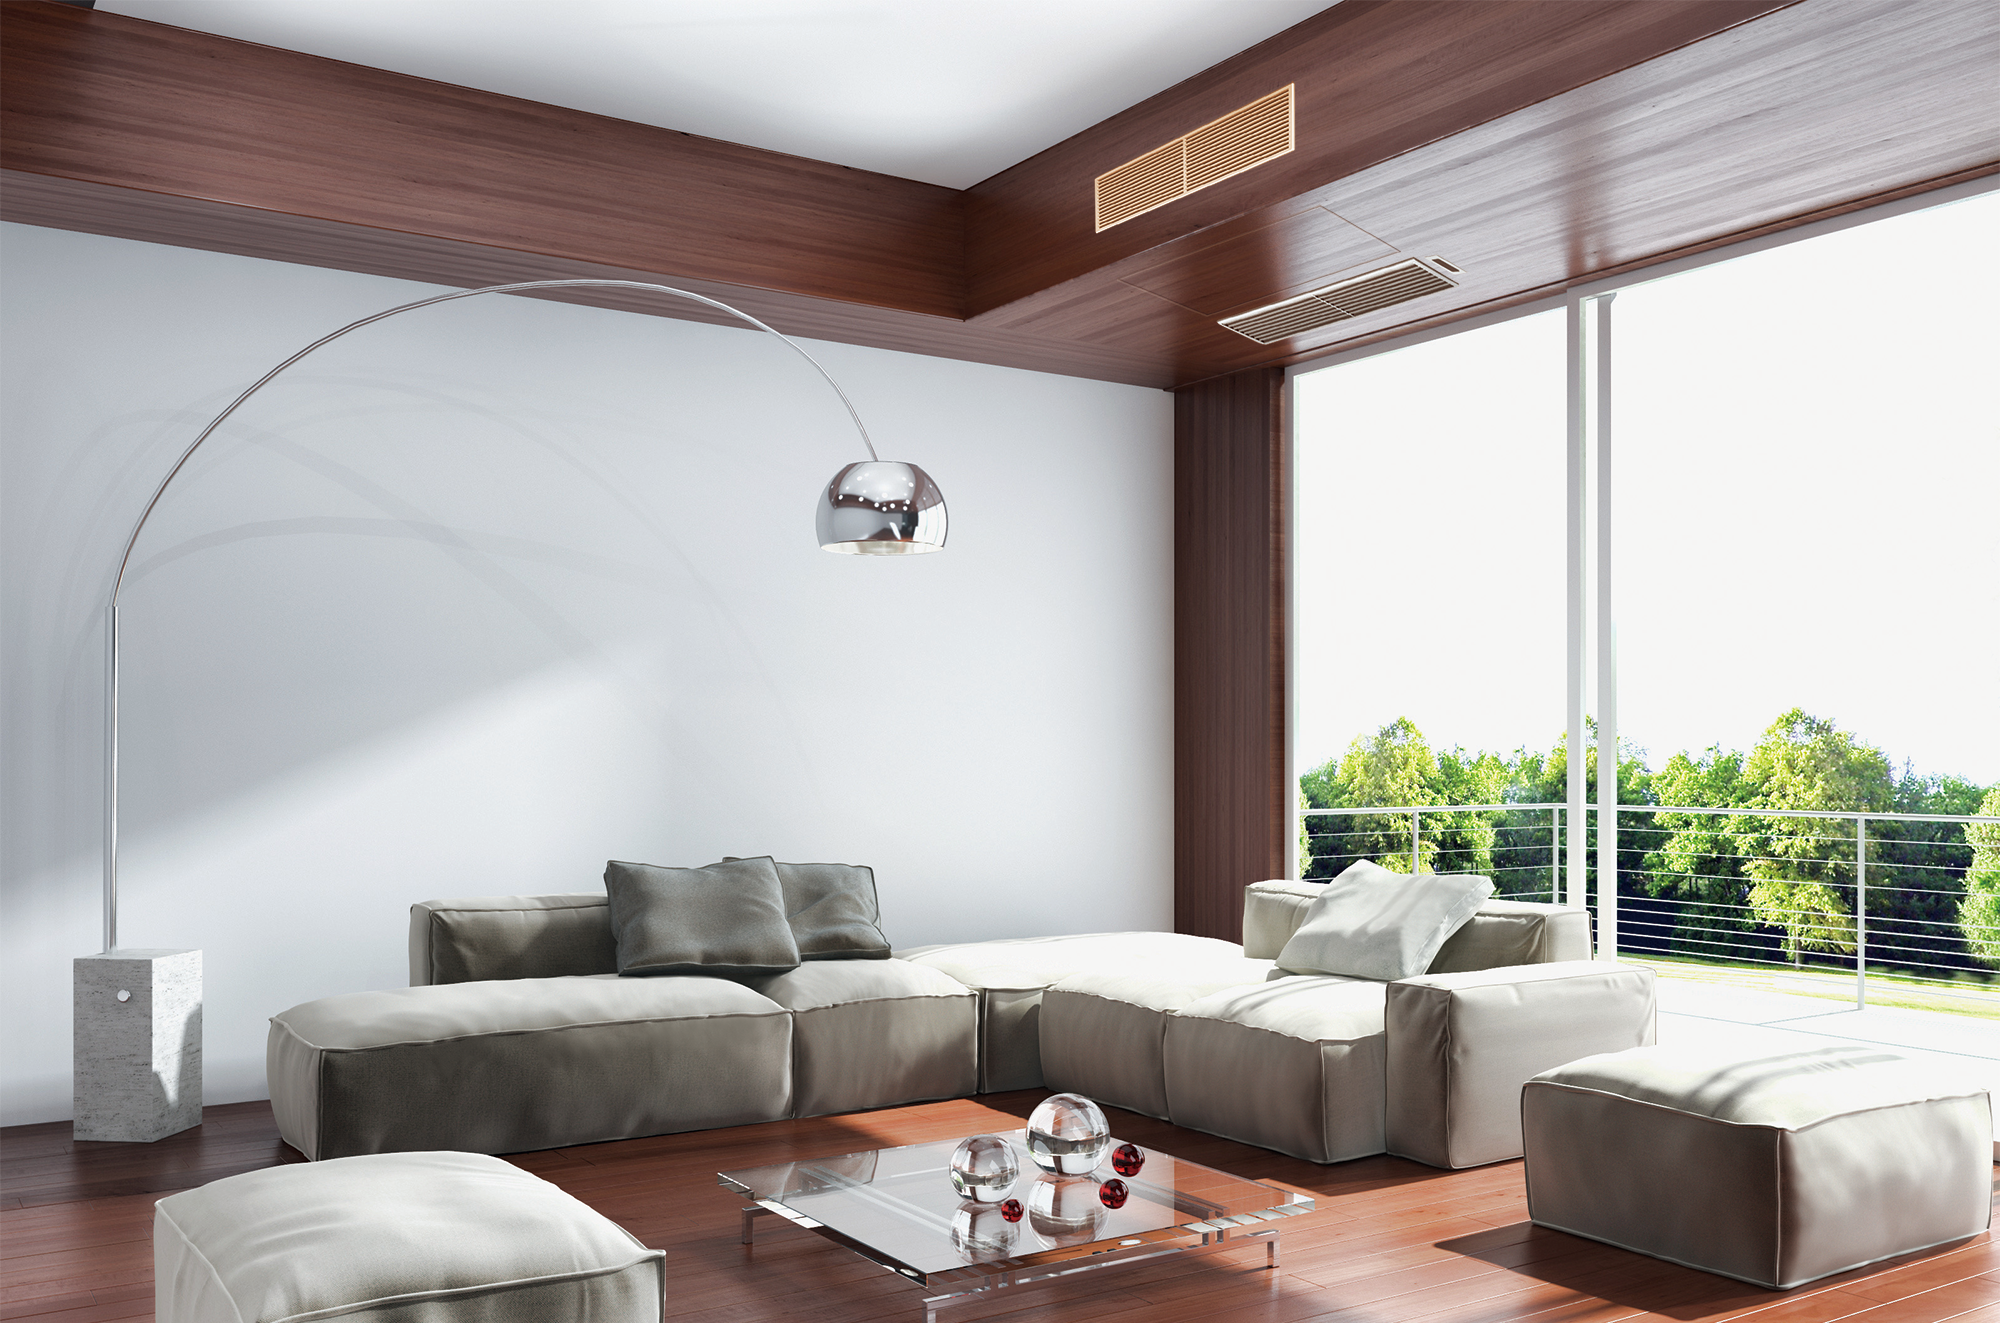 Stylish living room with bulkhead air conditioner vents installed.